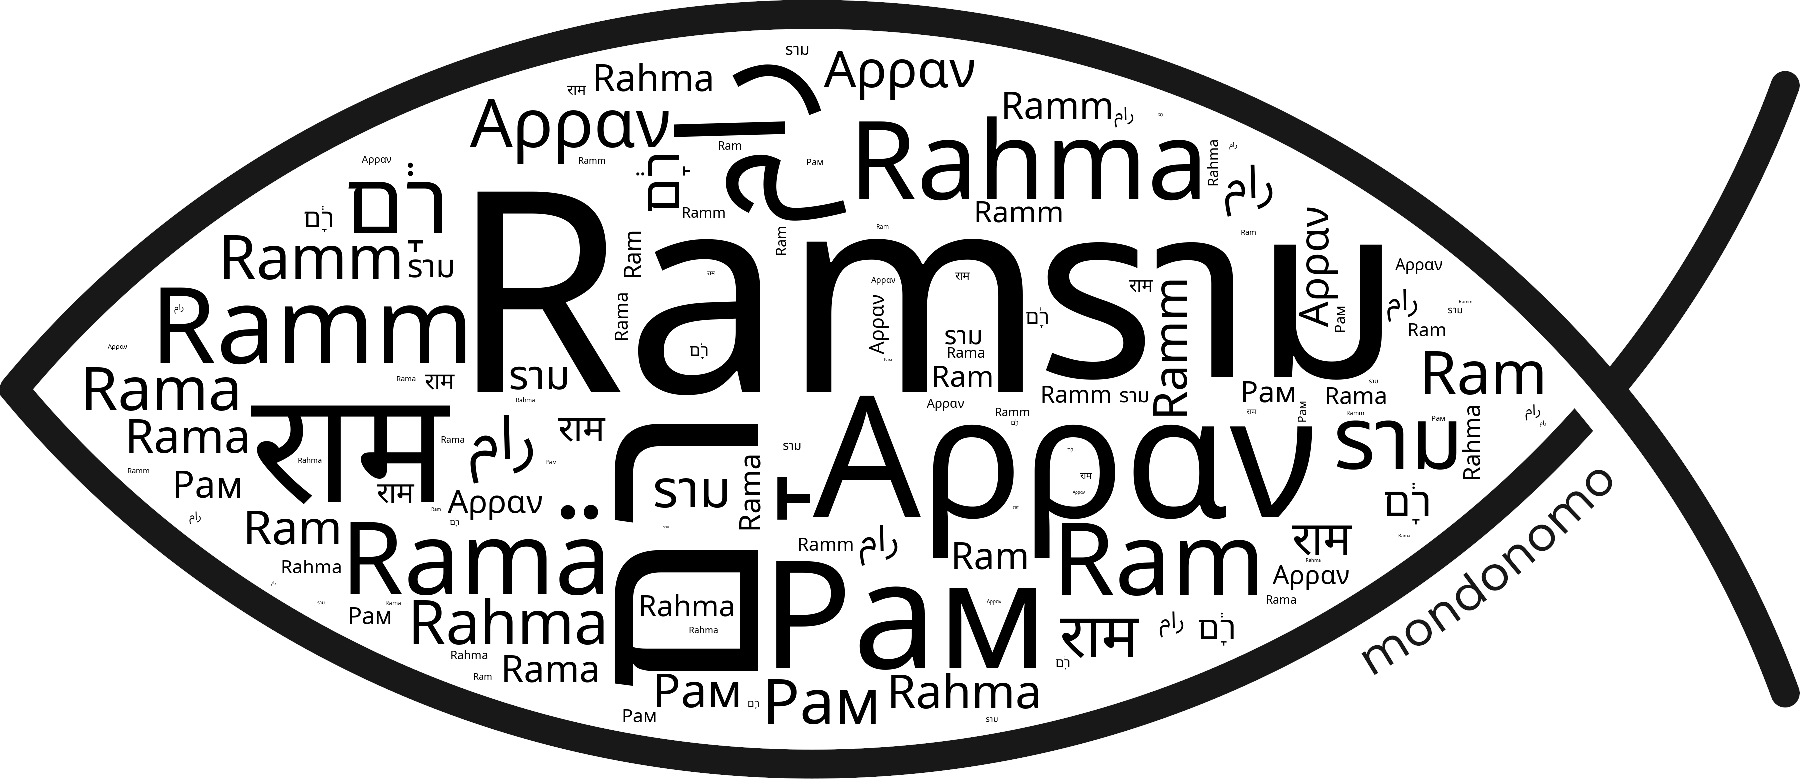 Name Ram in the world's Bibles